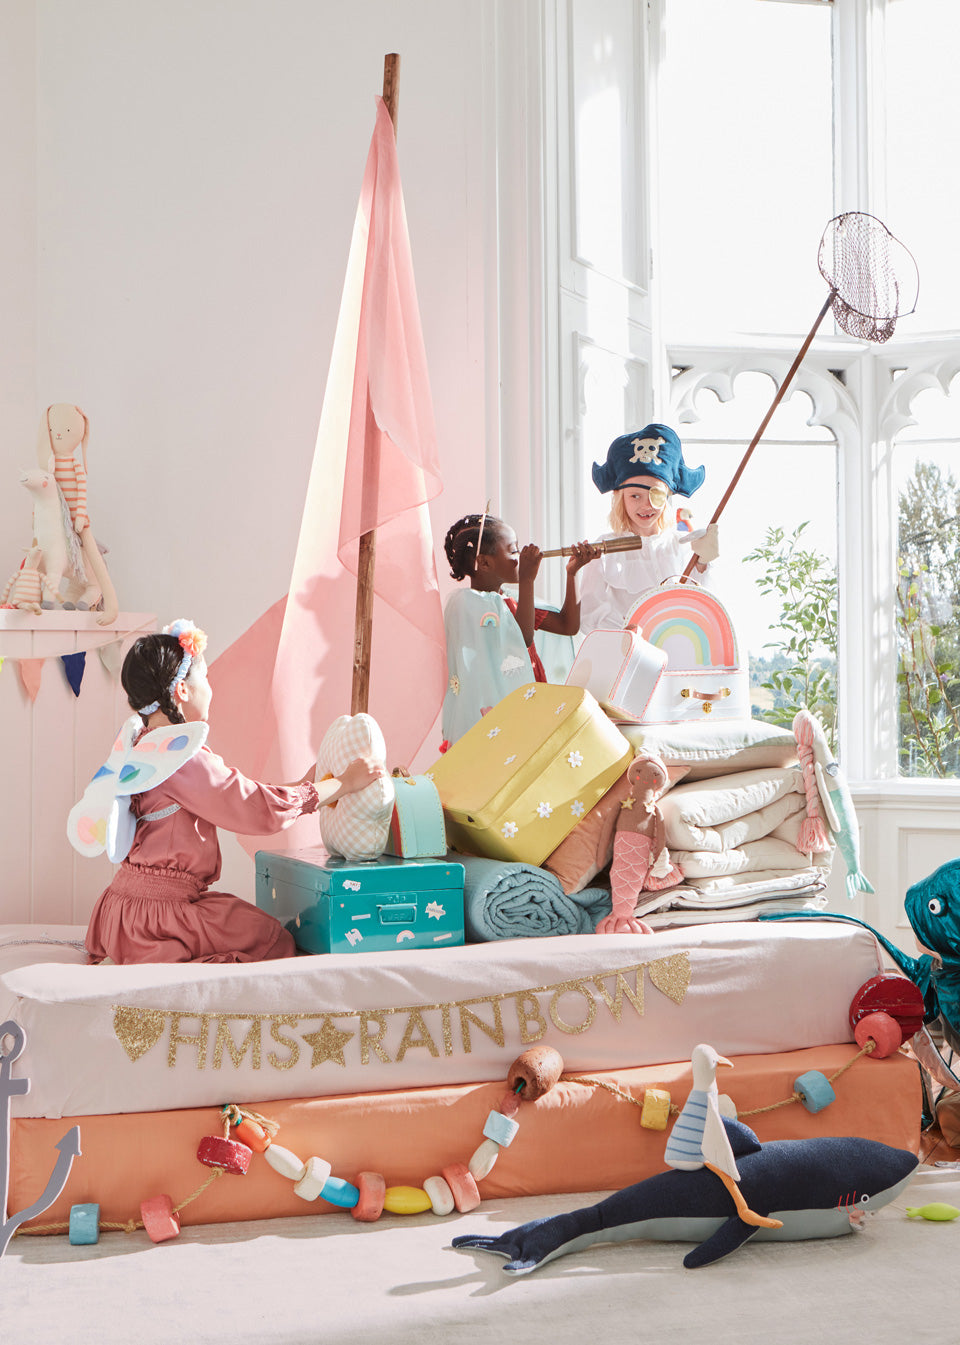 3 young kids wearing costumes play in a pillow fort decorated with colorful soft toys, such as rabbits, mermaid dolls, and a shark, and other accessories.